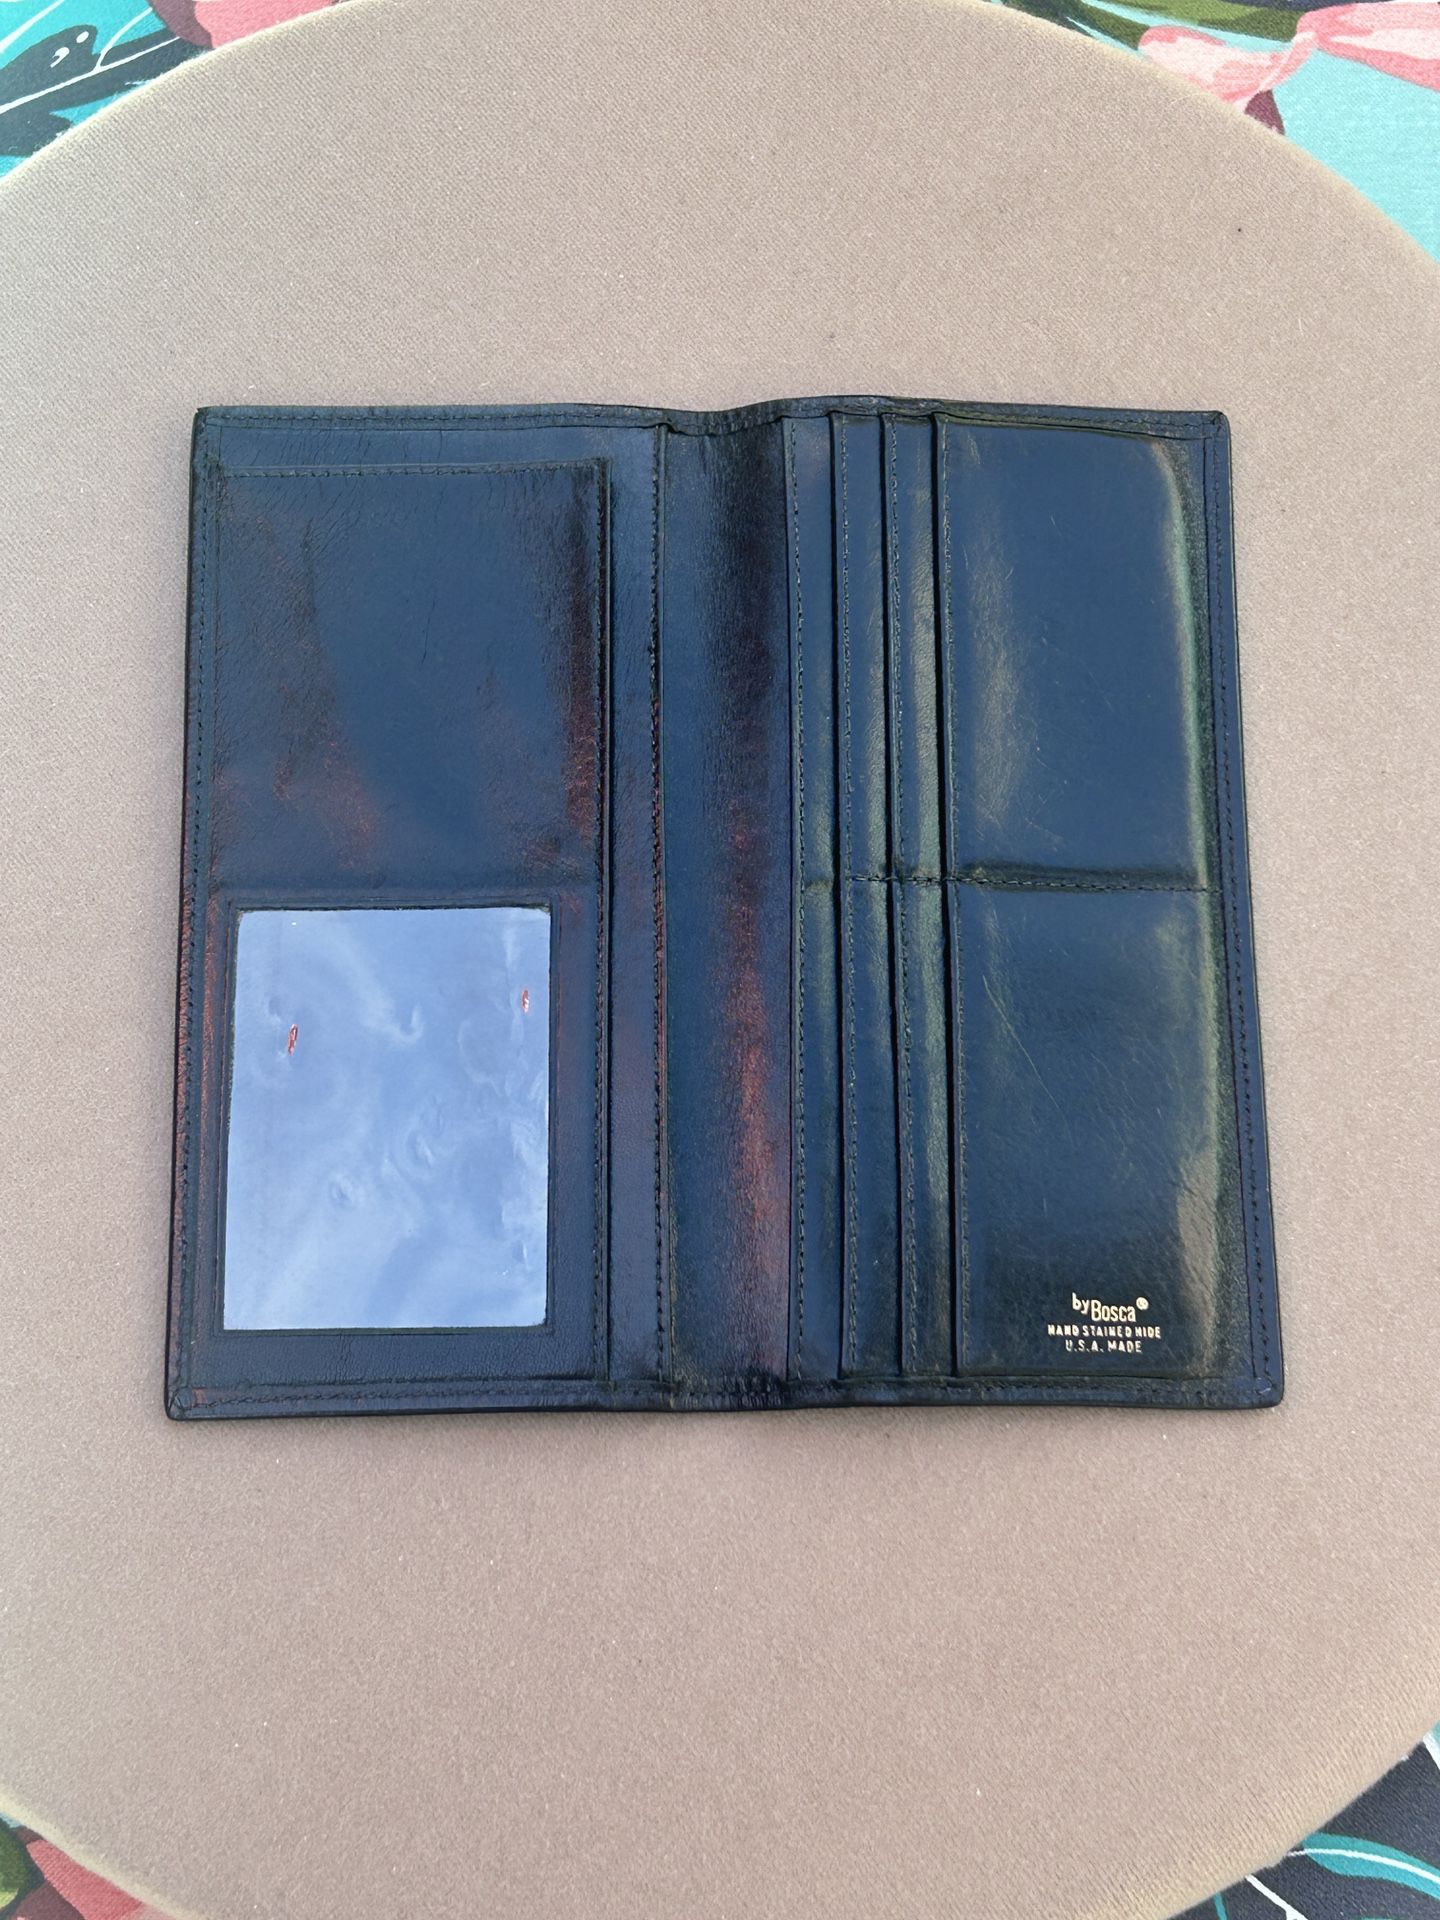 Leather Wallet